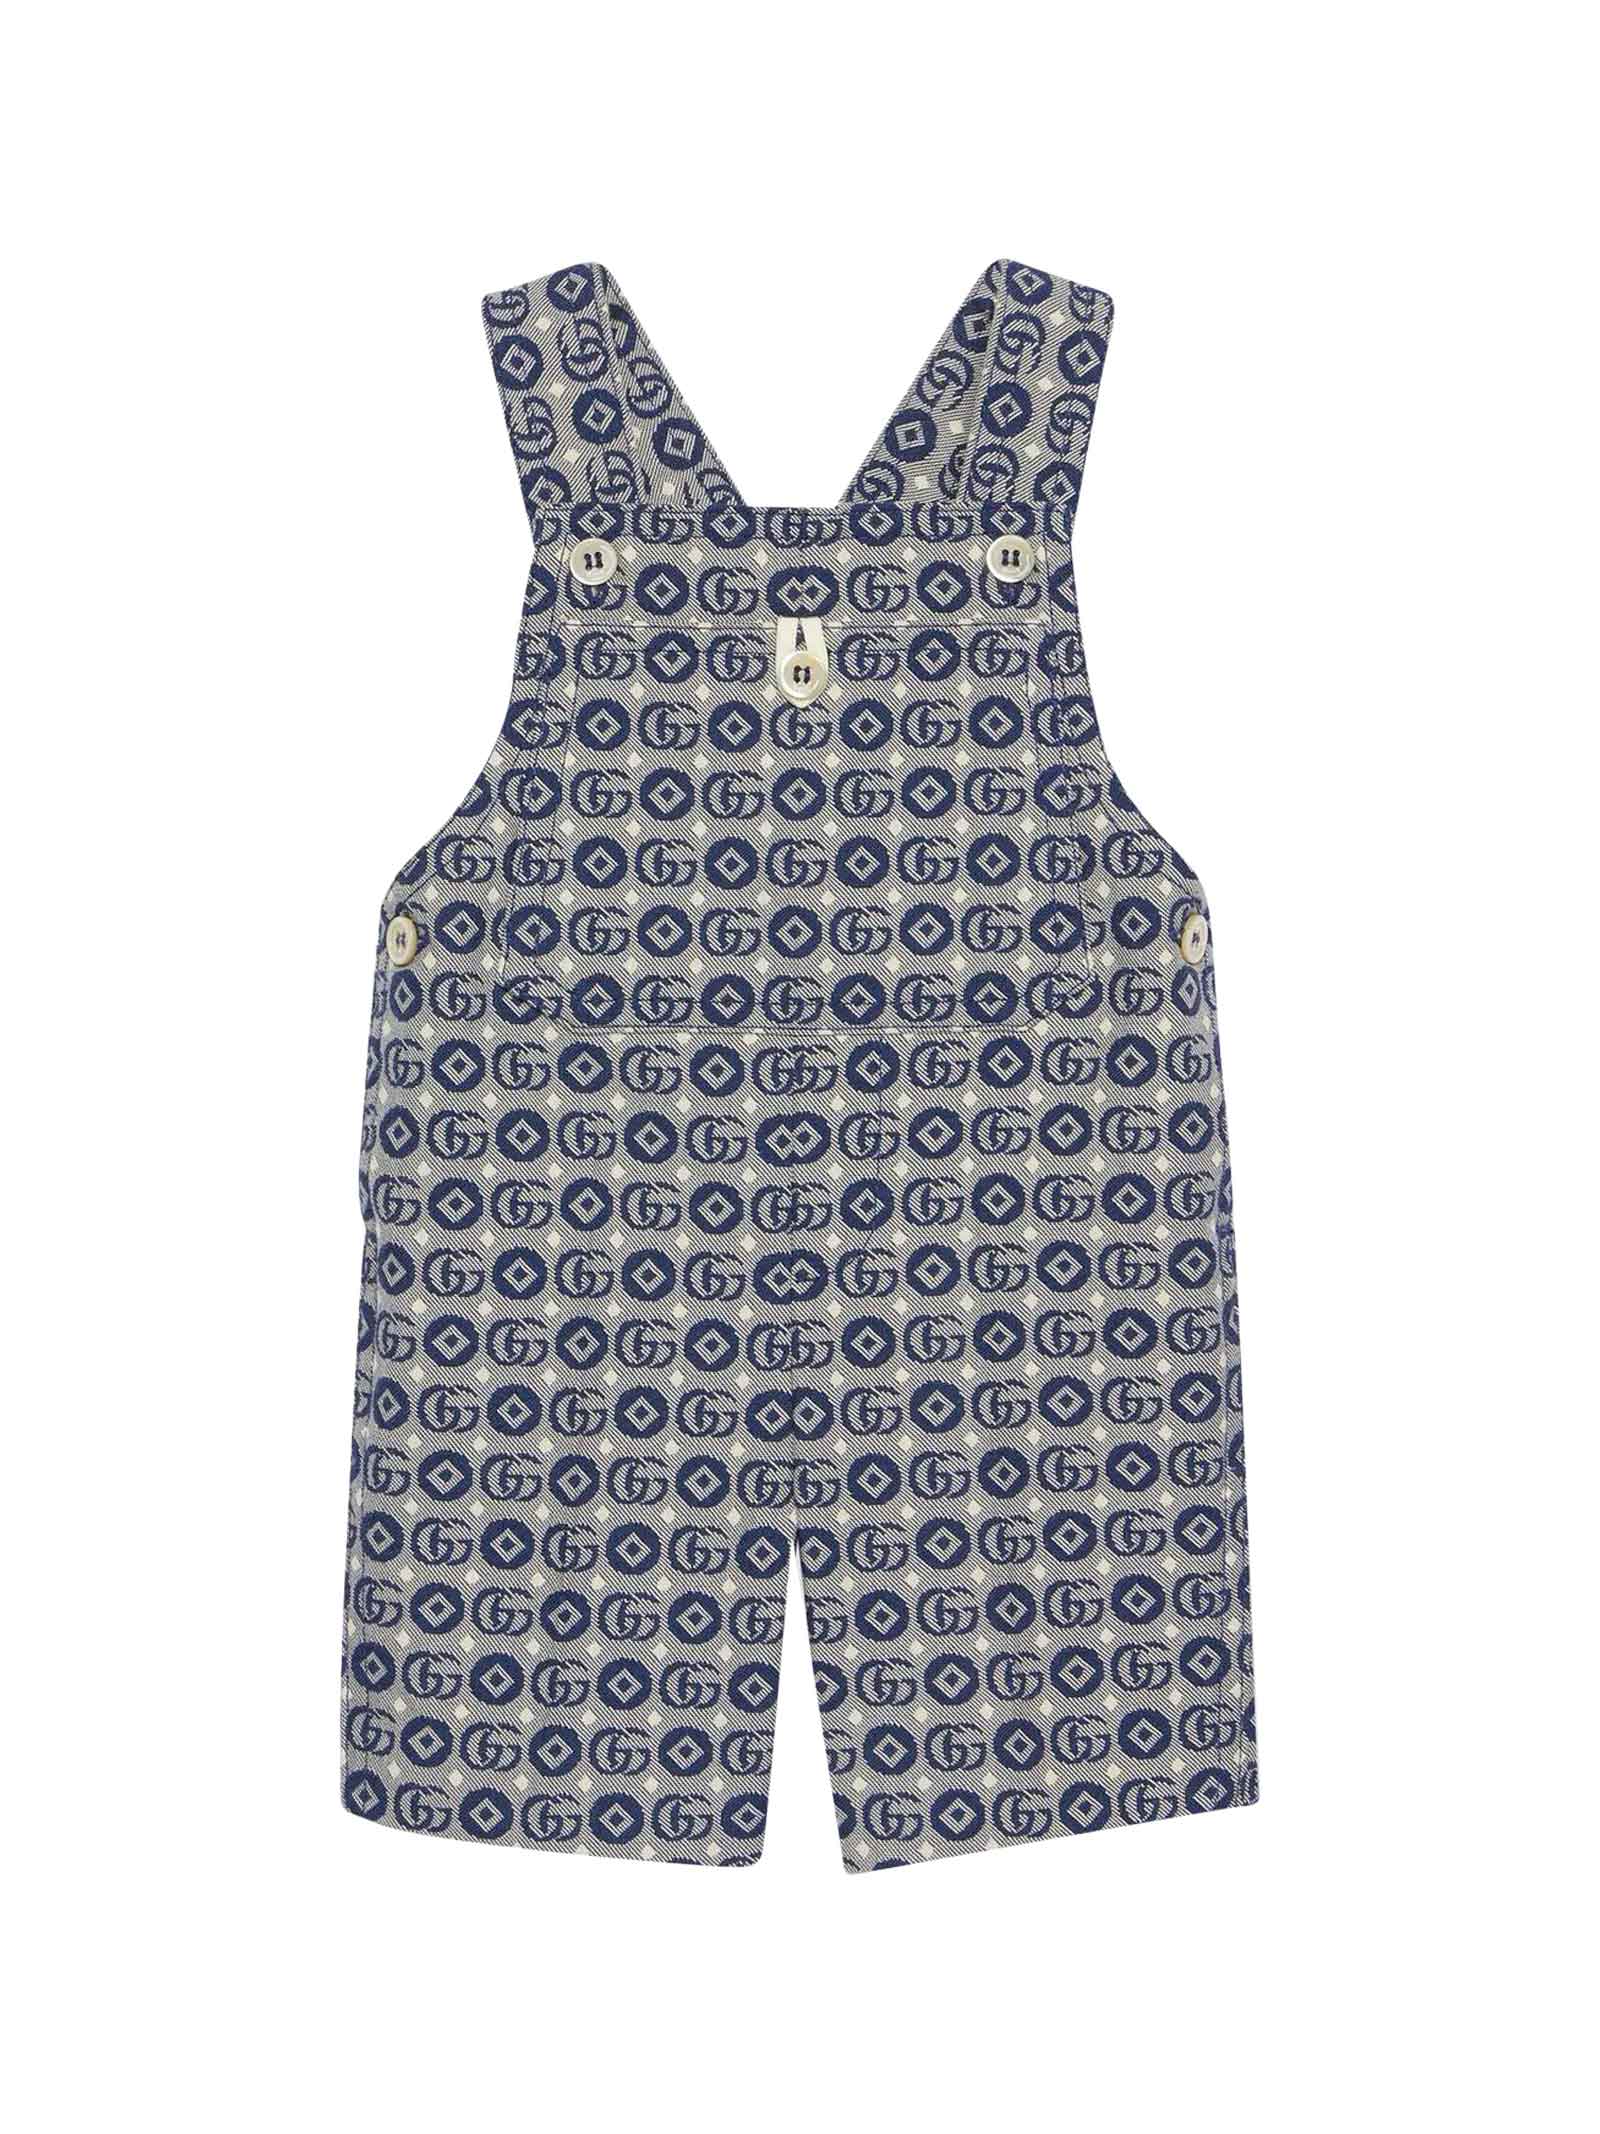 Gucci Navy Blue And Gray Baby Romper